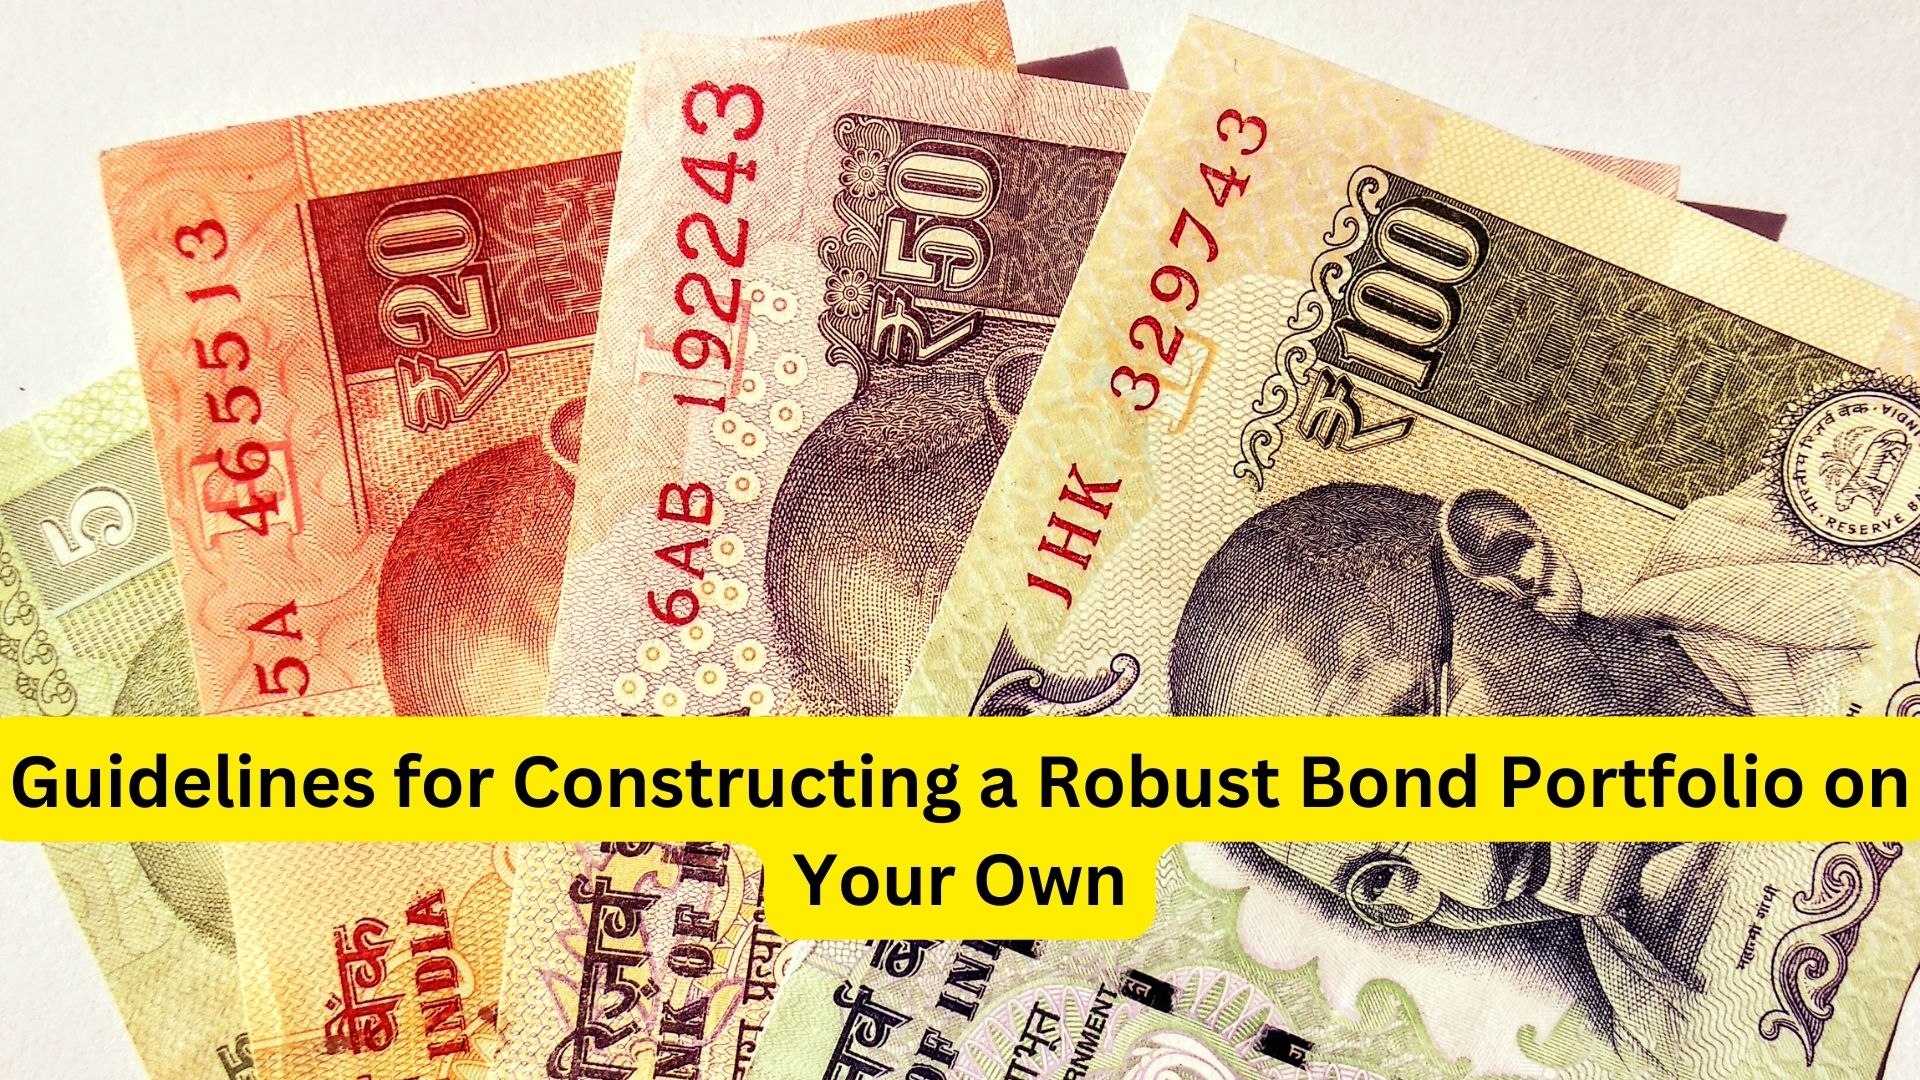 Guidelines for Constructing a Robust Bond Portfolio on Your Own